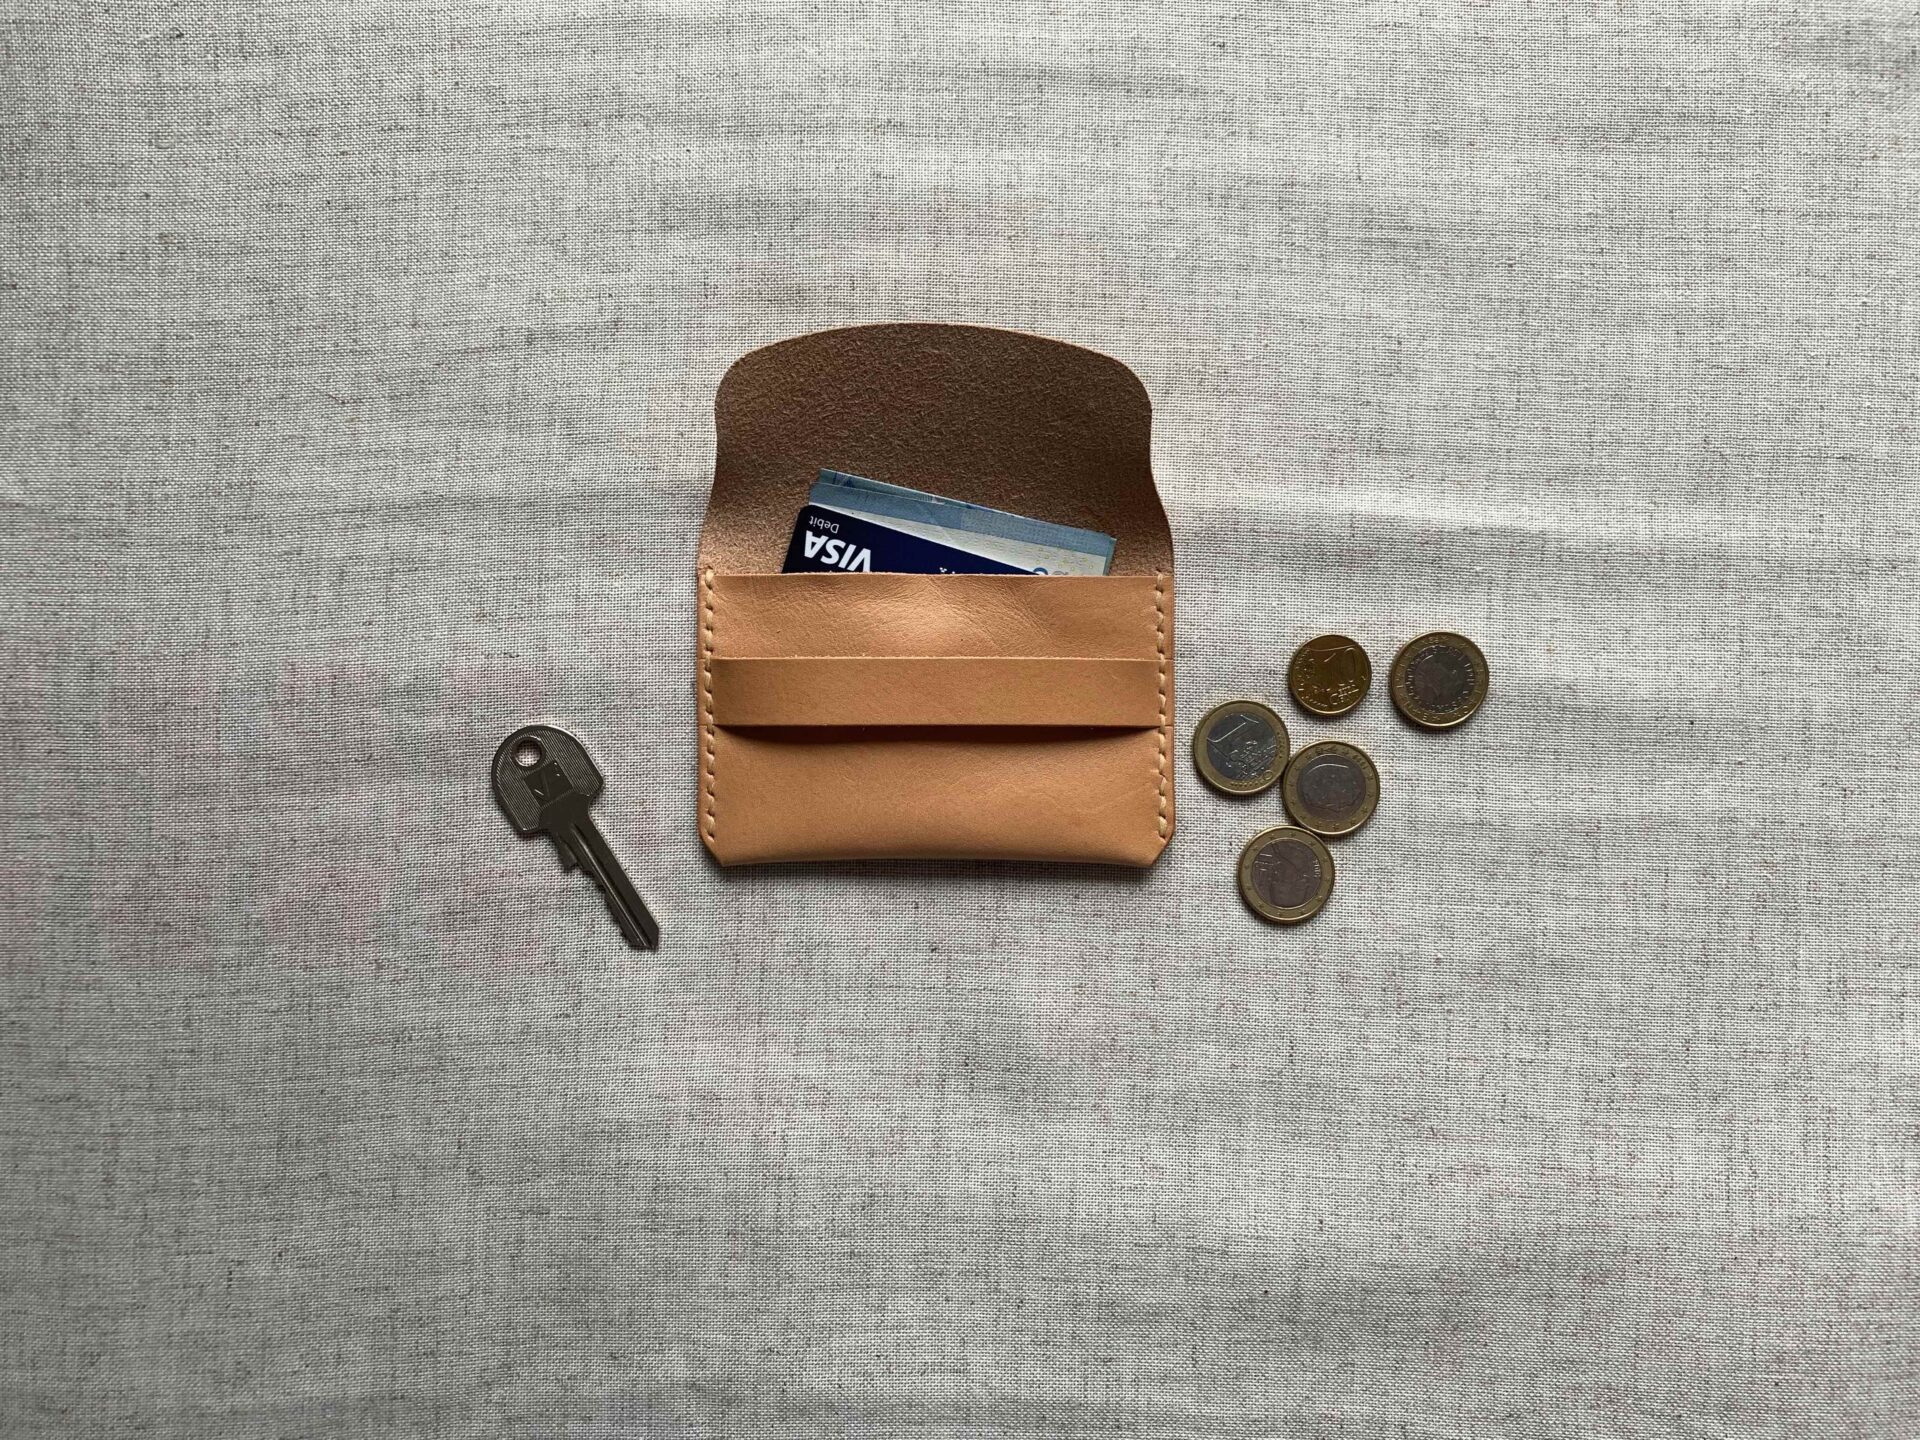 ‘Leather purse for everything (coins, cards, keys etc.)’